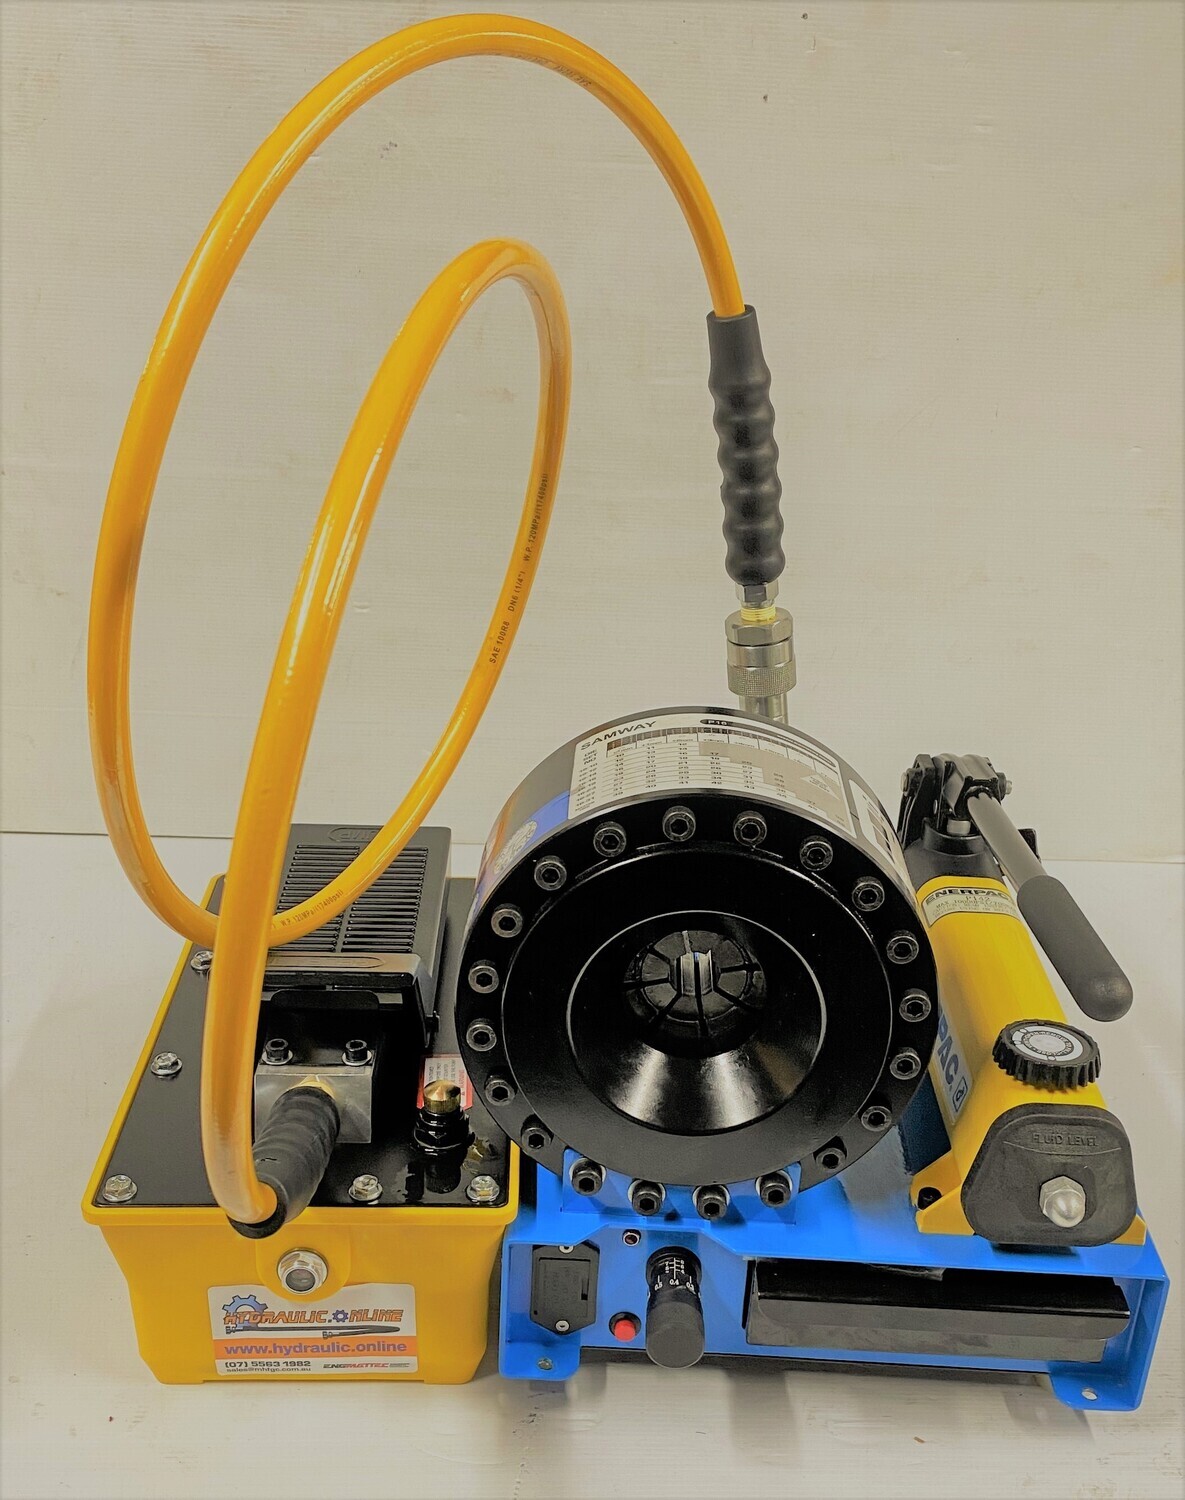 Portable Hand Operated Hydraulic Hose Crimper fitted with ENERPAC high speed 10,000 psi pump Crimp Dimeters from 10 to 38 mm. 